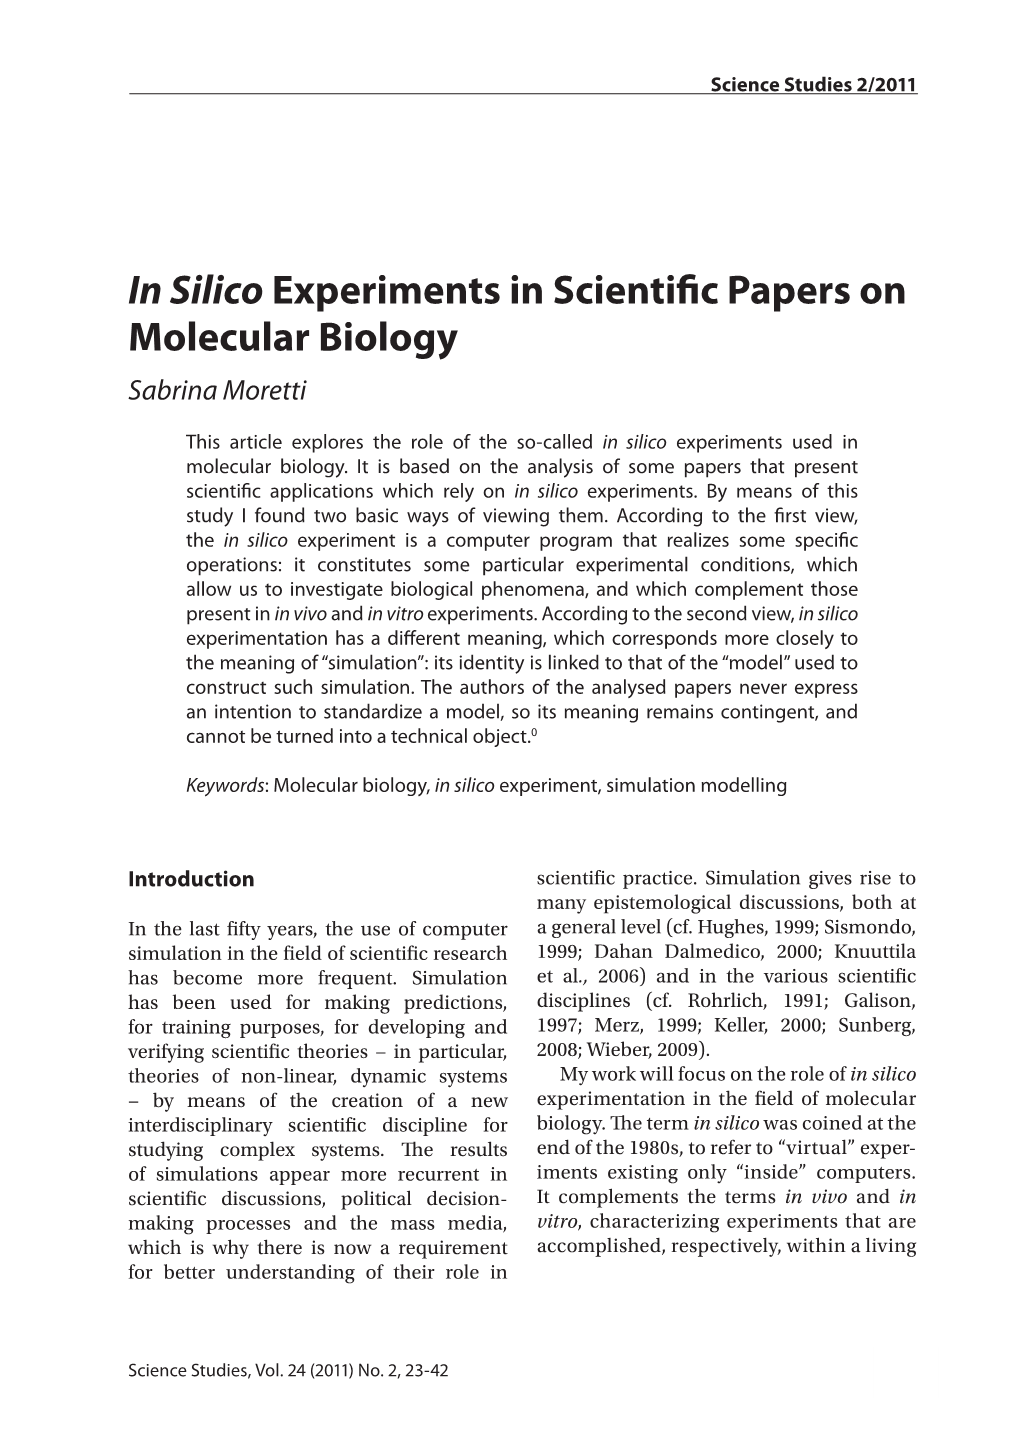 In Silico Experiments in Scientific Papers on Molecular Biology Sabrina Moretti